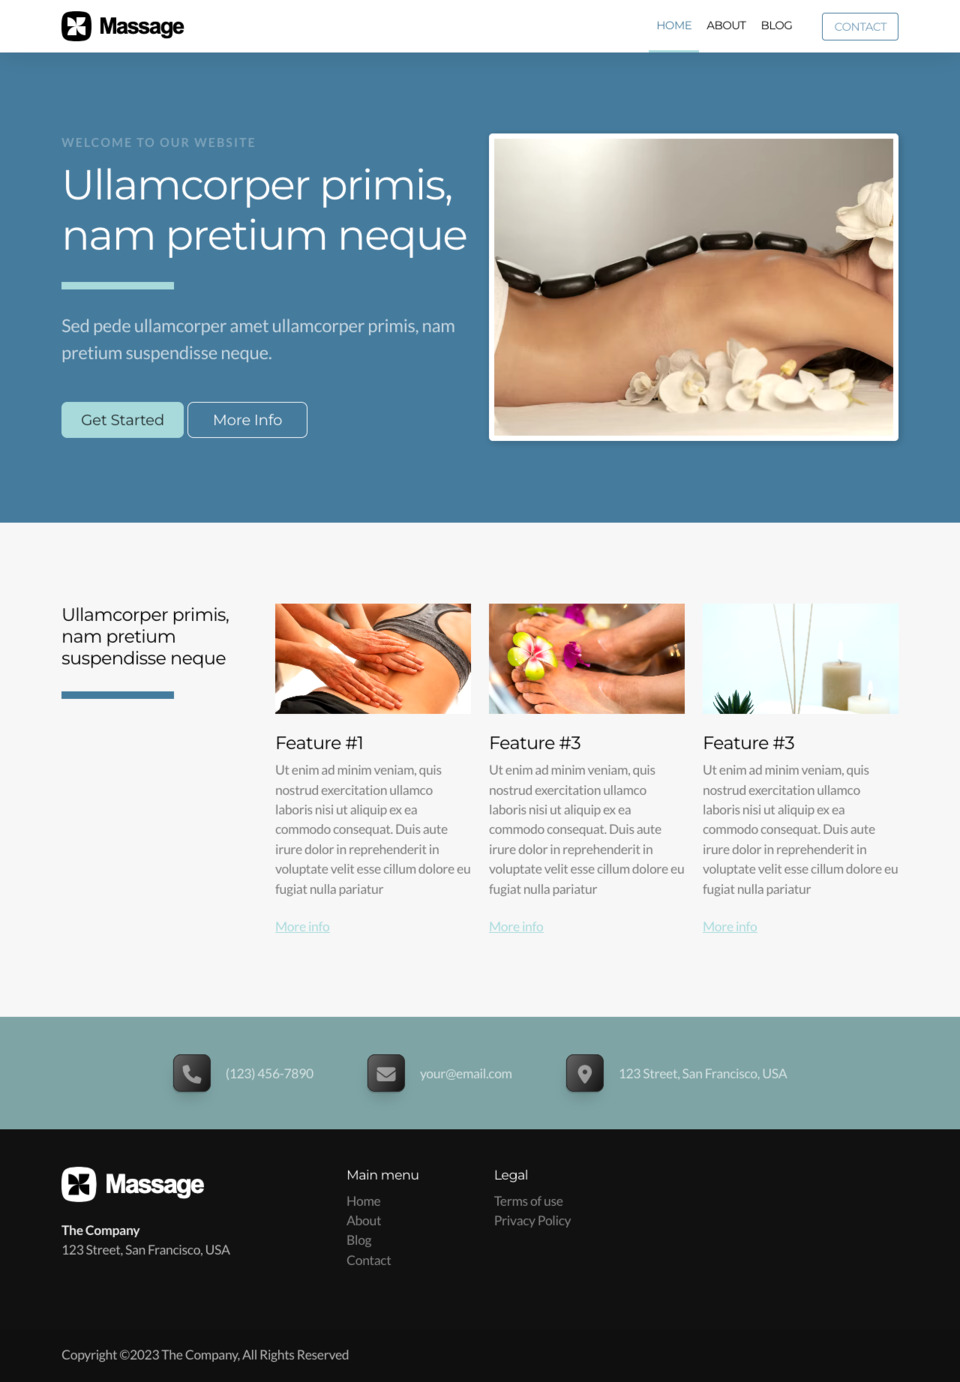 Massage Website Template - Ideal for small businesses in the spa, massage, wellness, and beauty industries